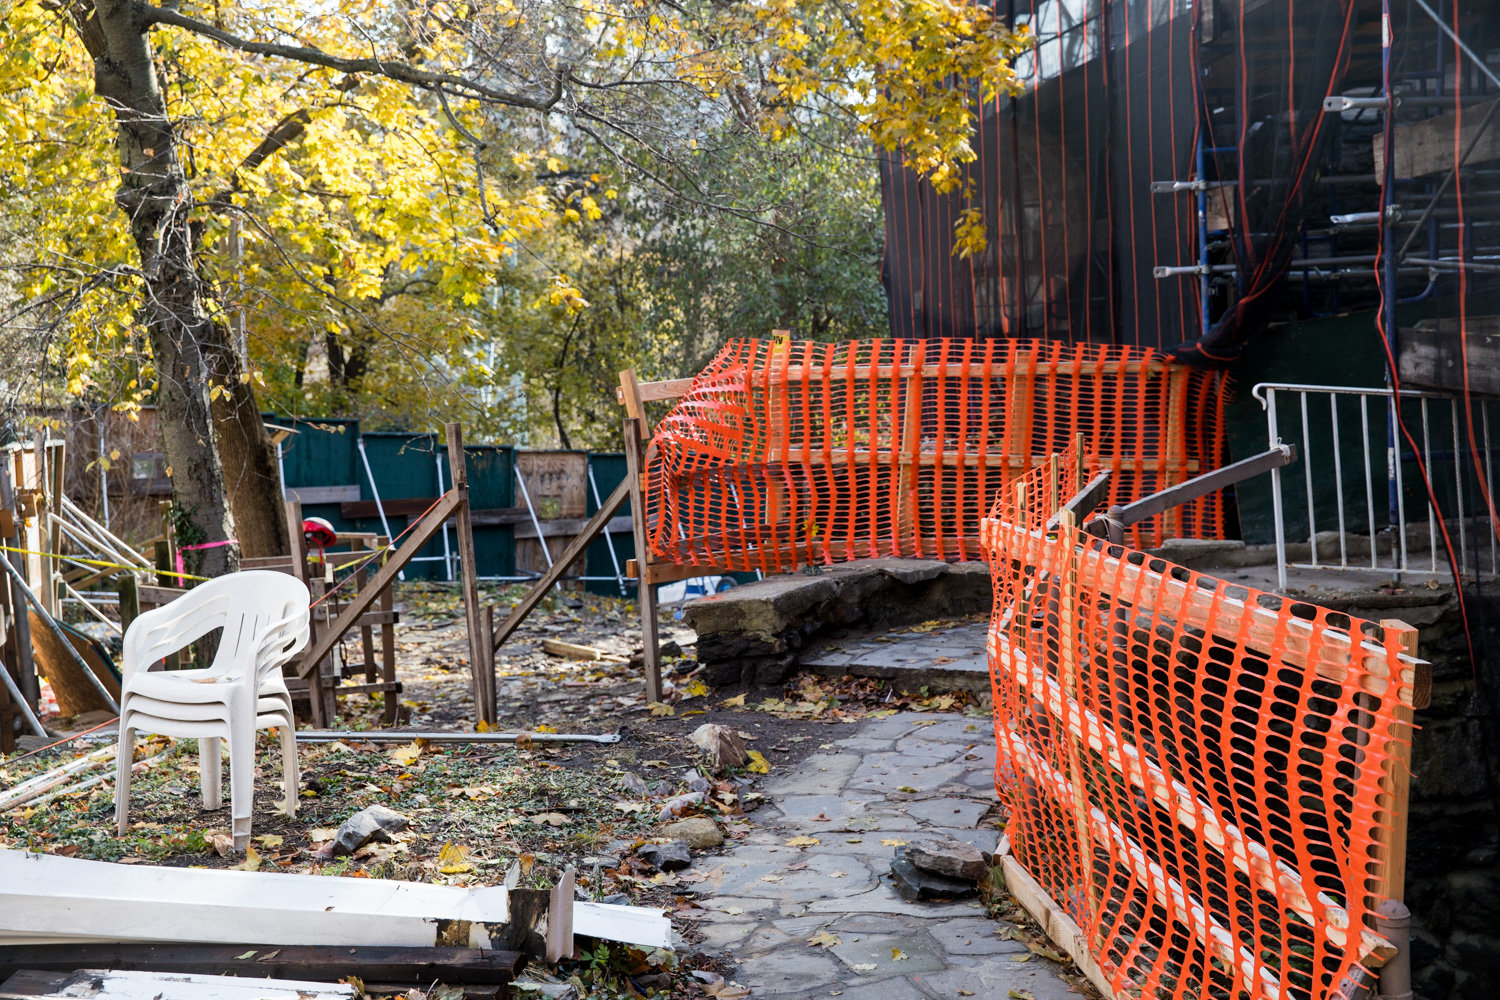 Plastic chairs sit on the ground outside the Villa Rosa Bonheur, a historic building on Spuyten Duyvil’s Palisade Avenue, that is set to be demolished, making way for a larger apartment building, much to the chagrin of neighbors.